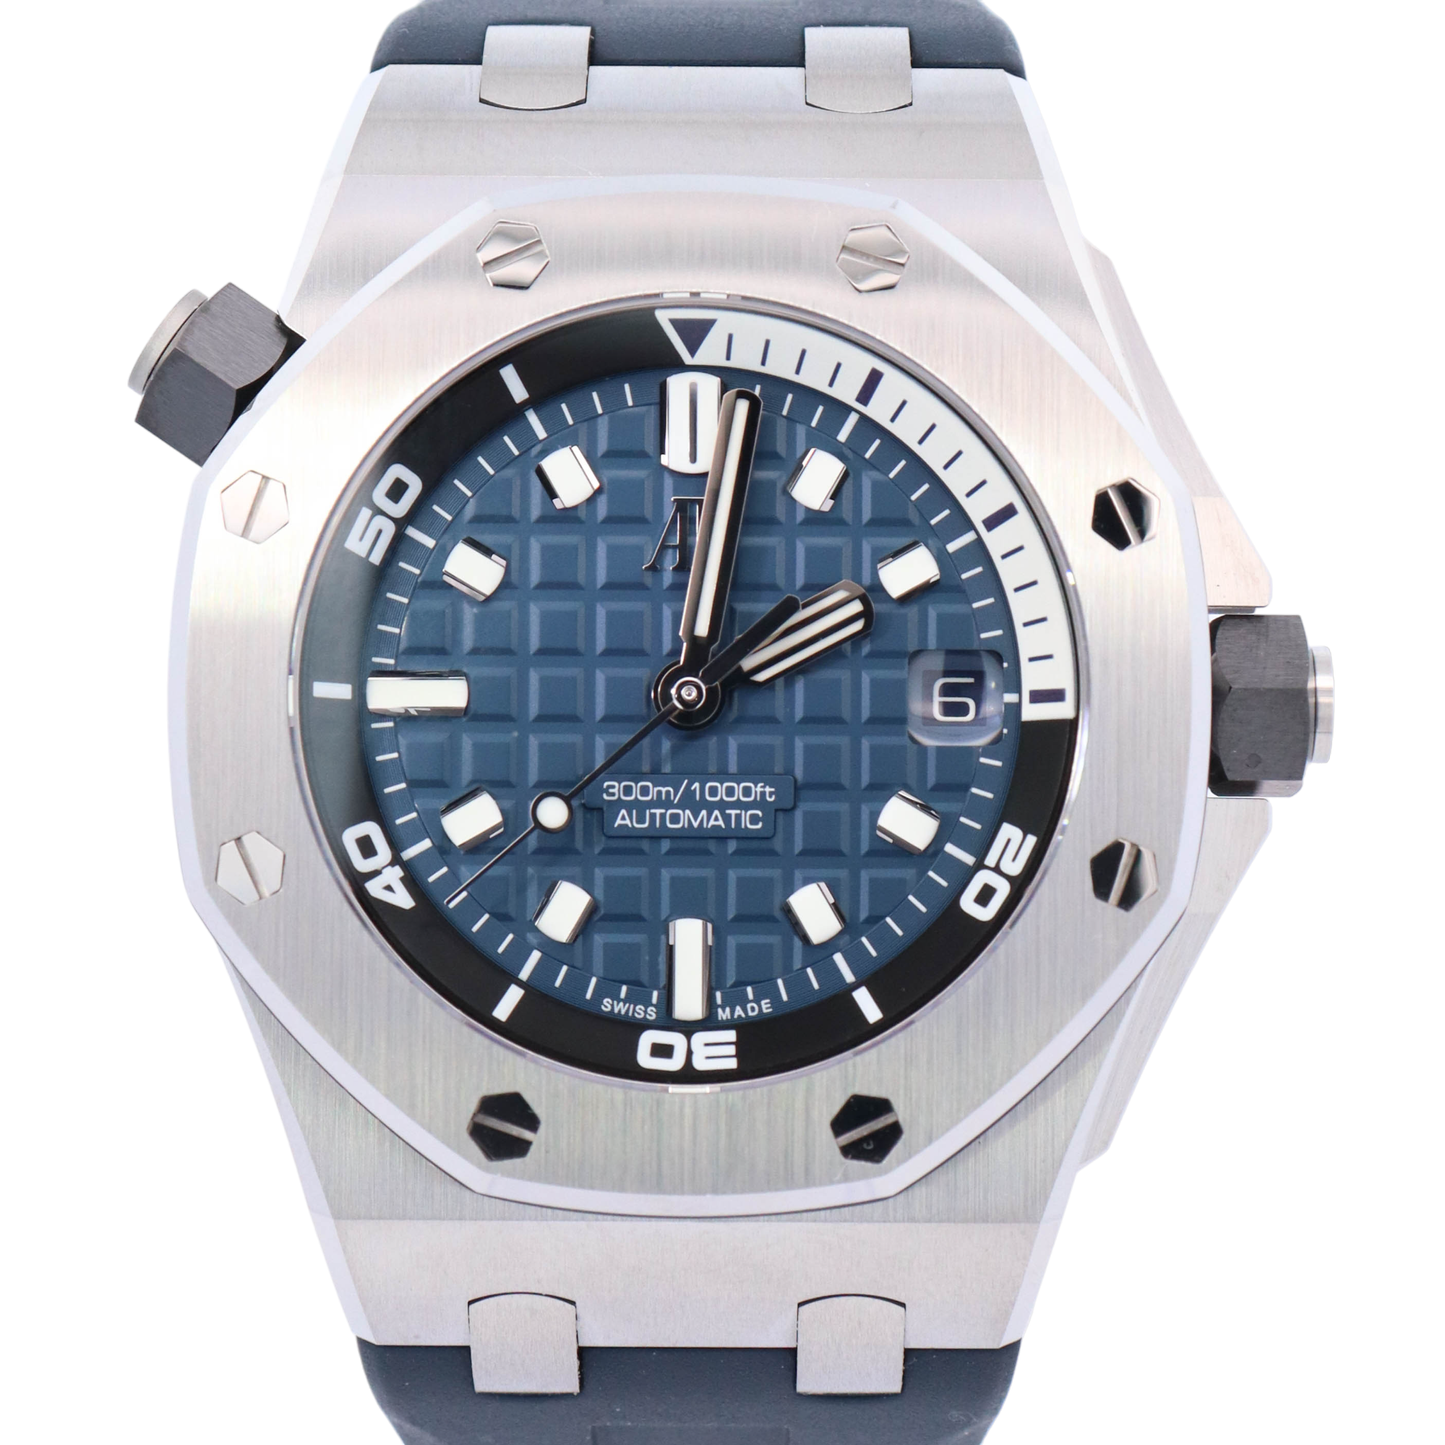 Audemars Piguet Royal Oak Offshore 42mm Stainless Steel Blue Stick Dial Watch Reference# 15720ST.OO.A027CA.01 - Happy Jewelers Fine Jewelry Lifetime Warranty